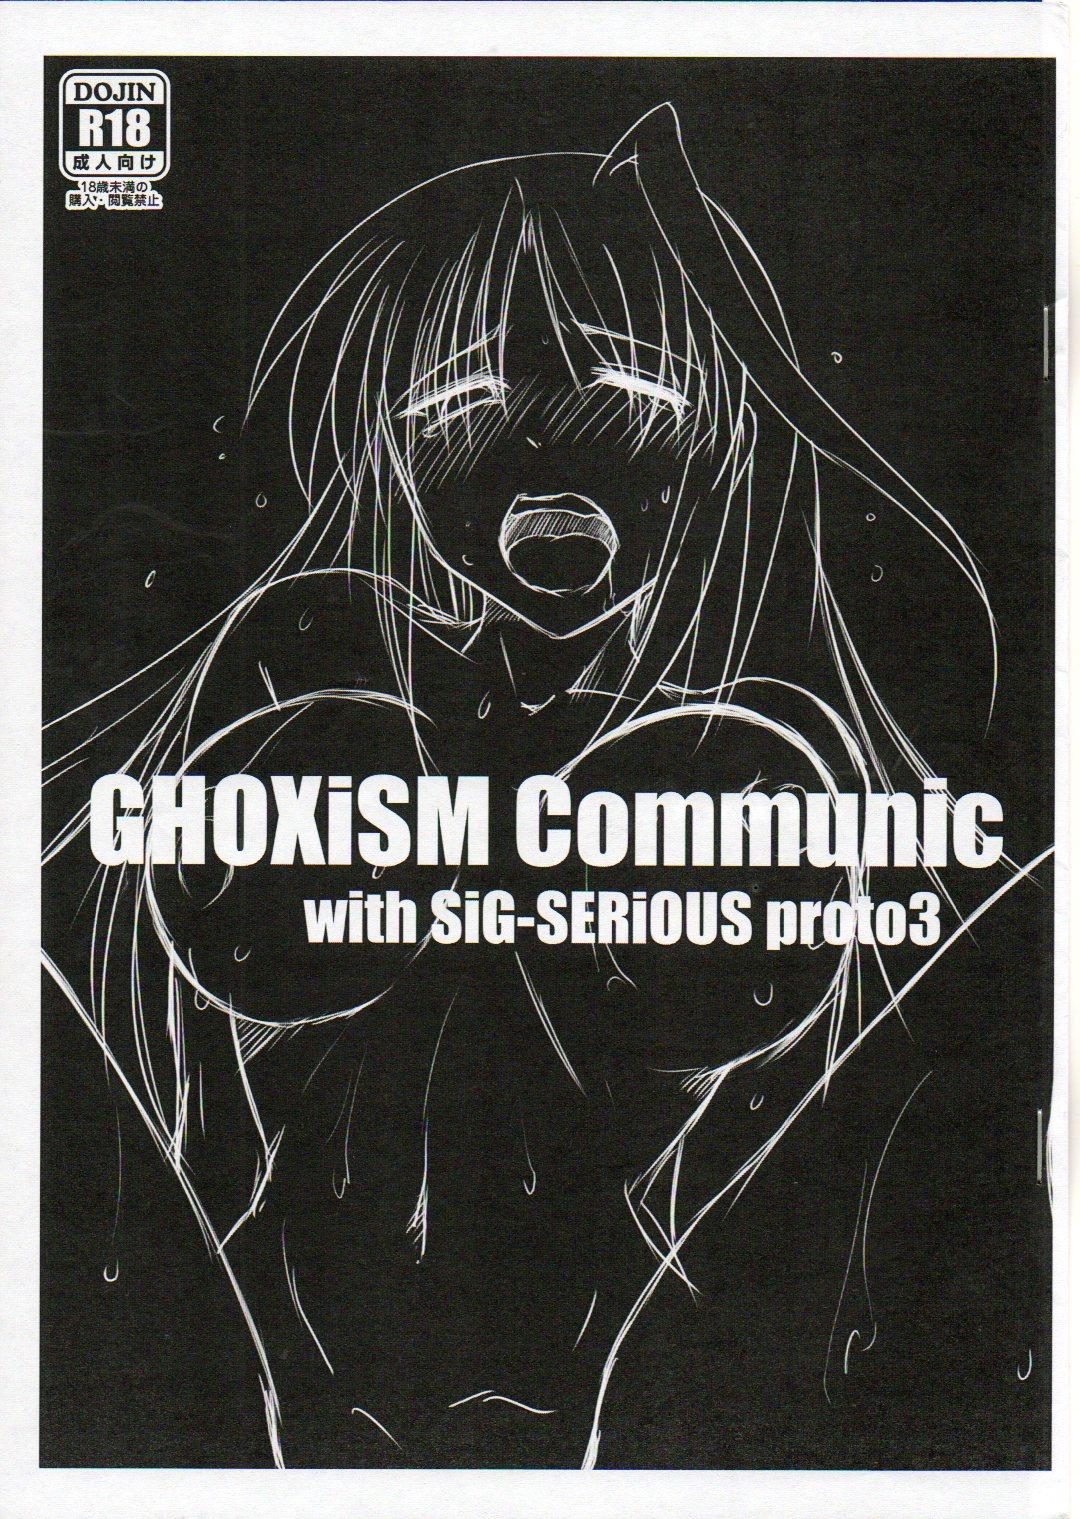 GHOXiSM Communic with Sig-SERIOUS proto 3 0